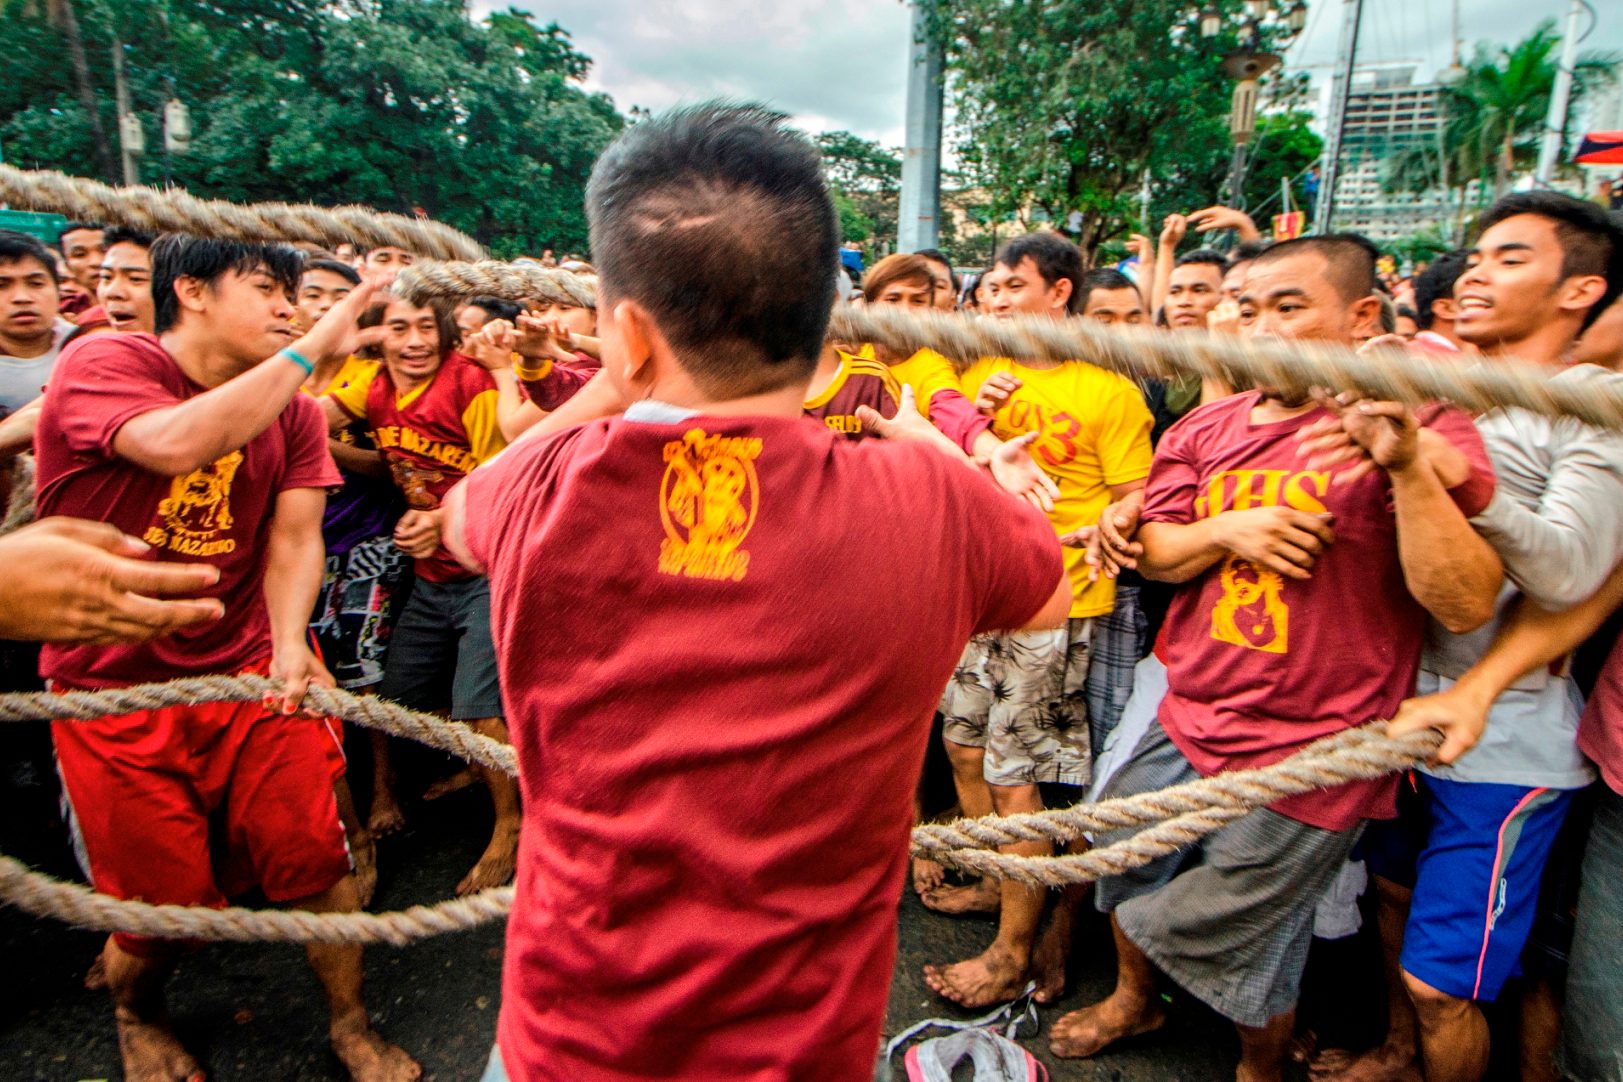 PRECAUTION. Devotees of the Black Nazarene trying to untangle the rope and preventing accidents.  